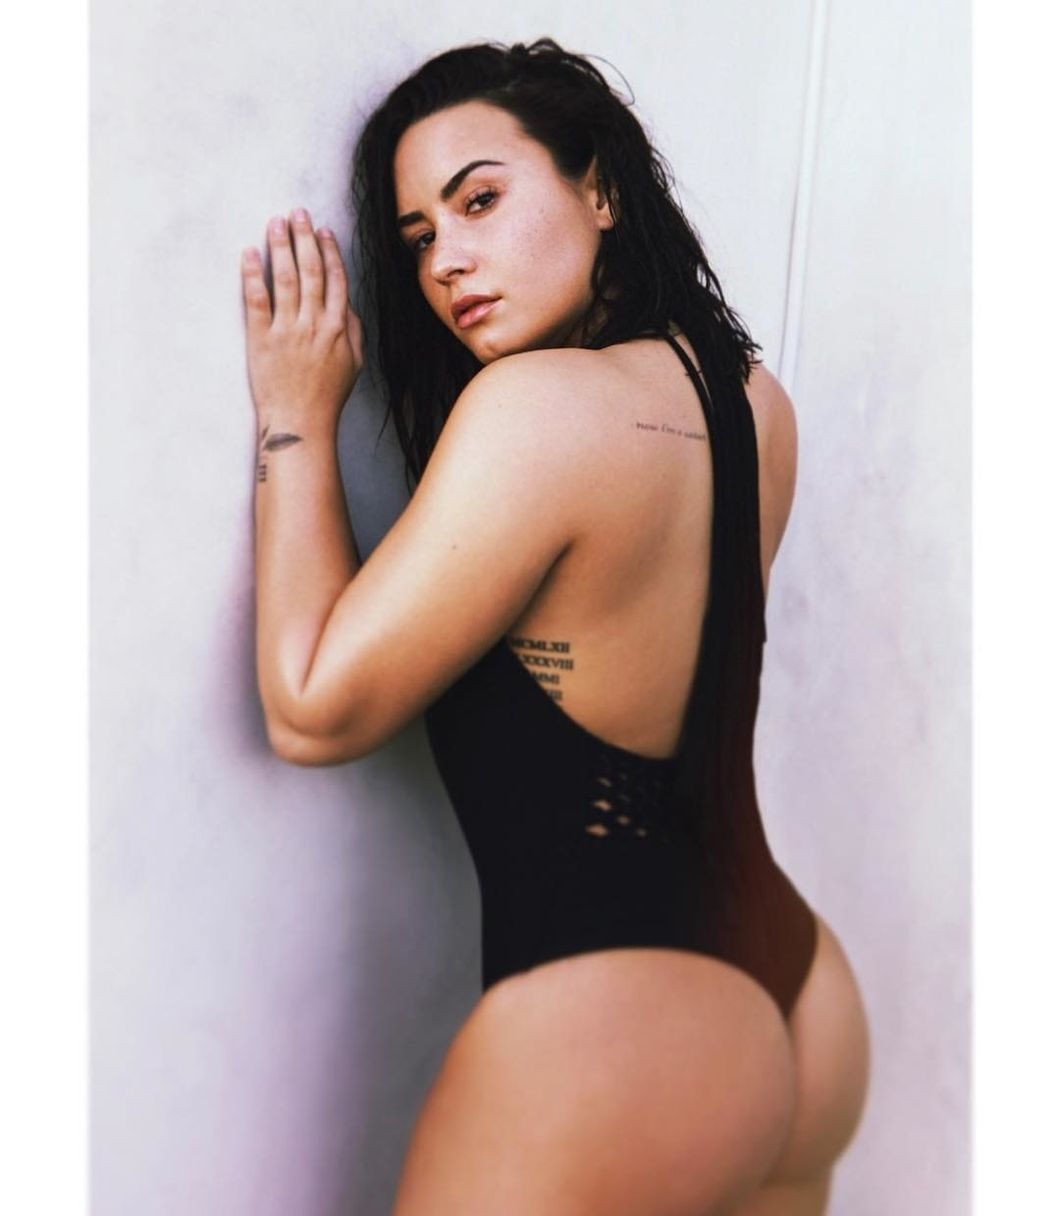 Demi Lovato Shows Us All That Mental Health Is An Ongoing Struggle